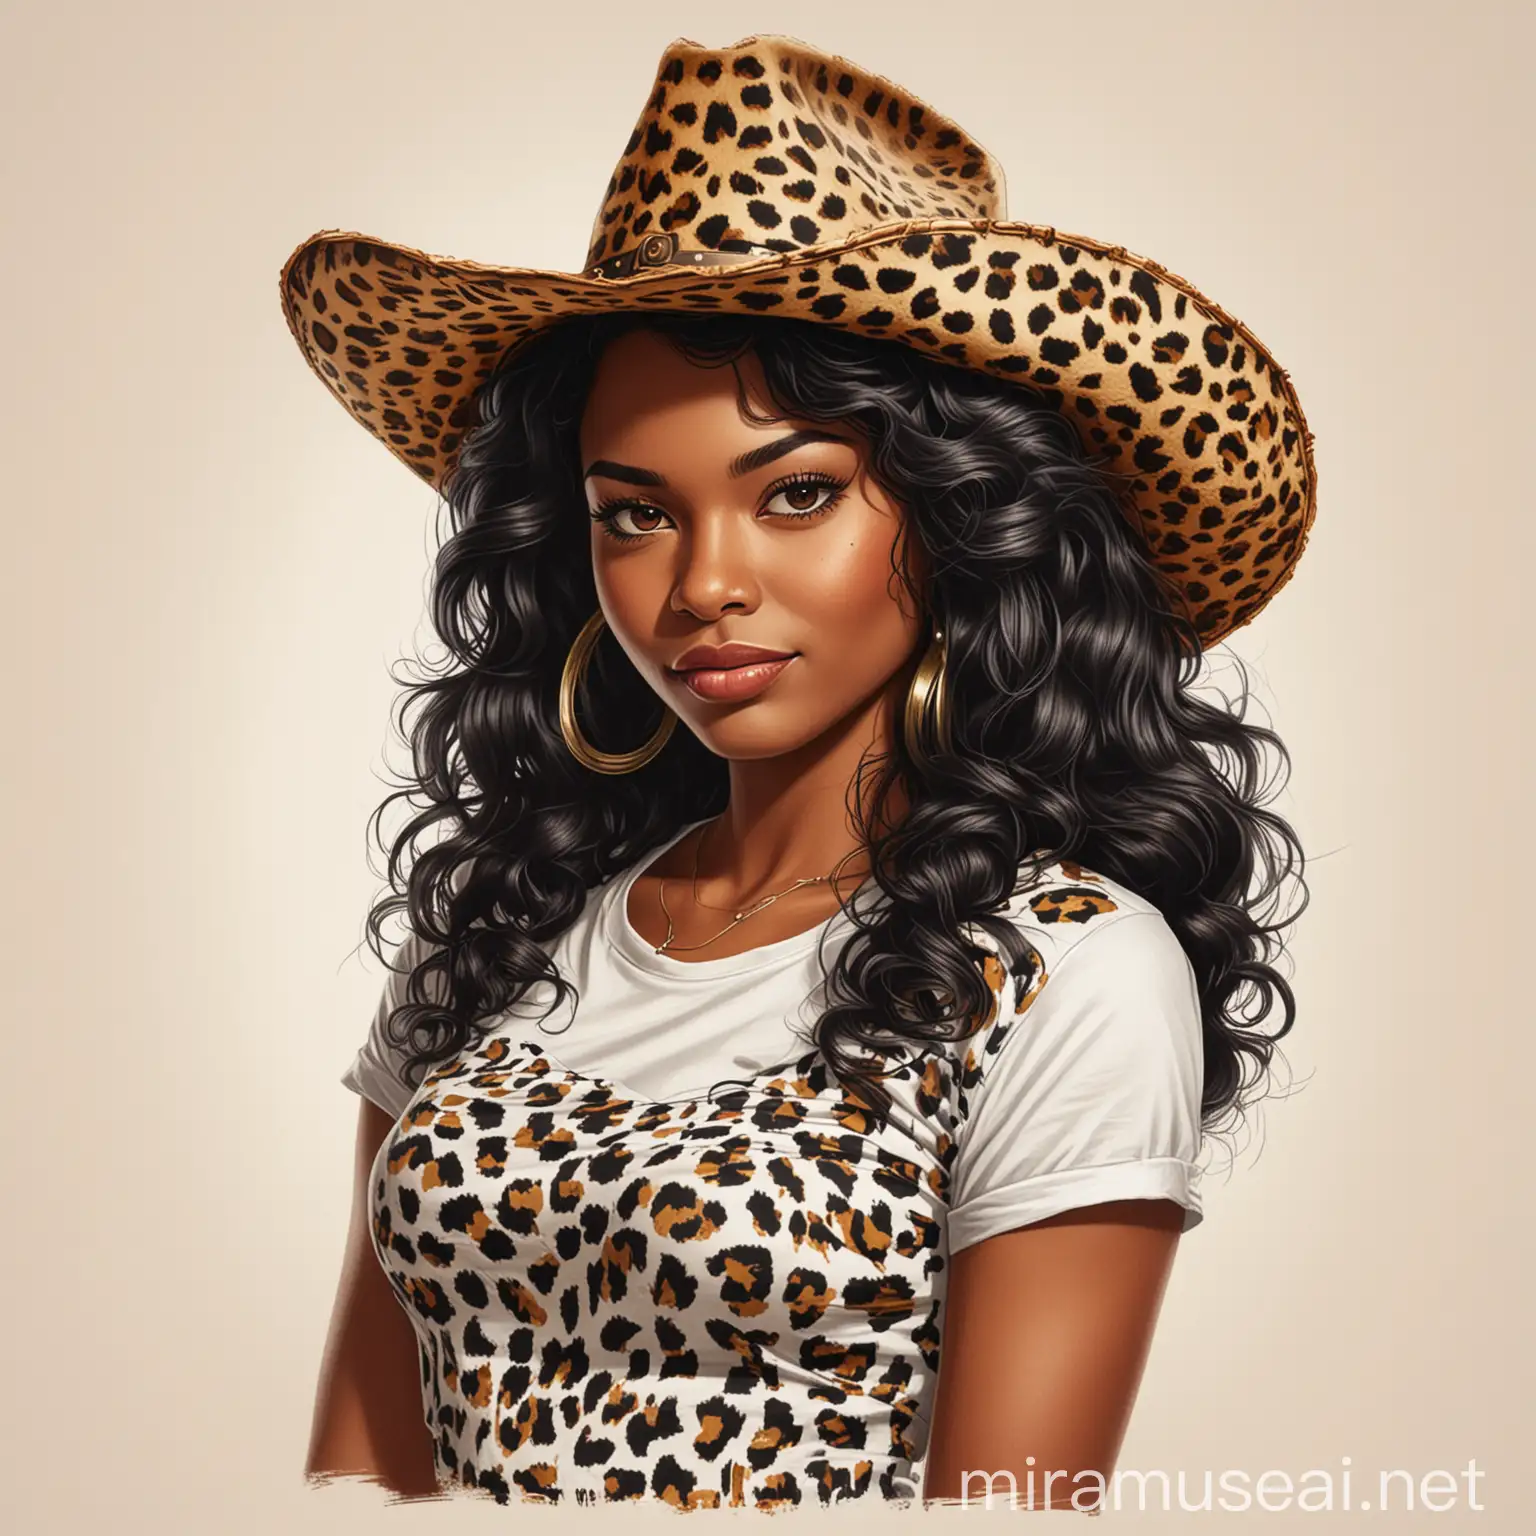 Design a retro-style illustration for T-shirt featuring an African American cowgirl with long black wavy hair, tipping her leopard print hat, set against white background. No cropping.